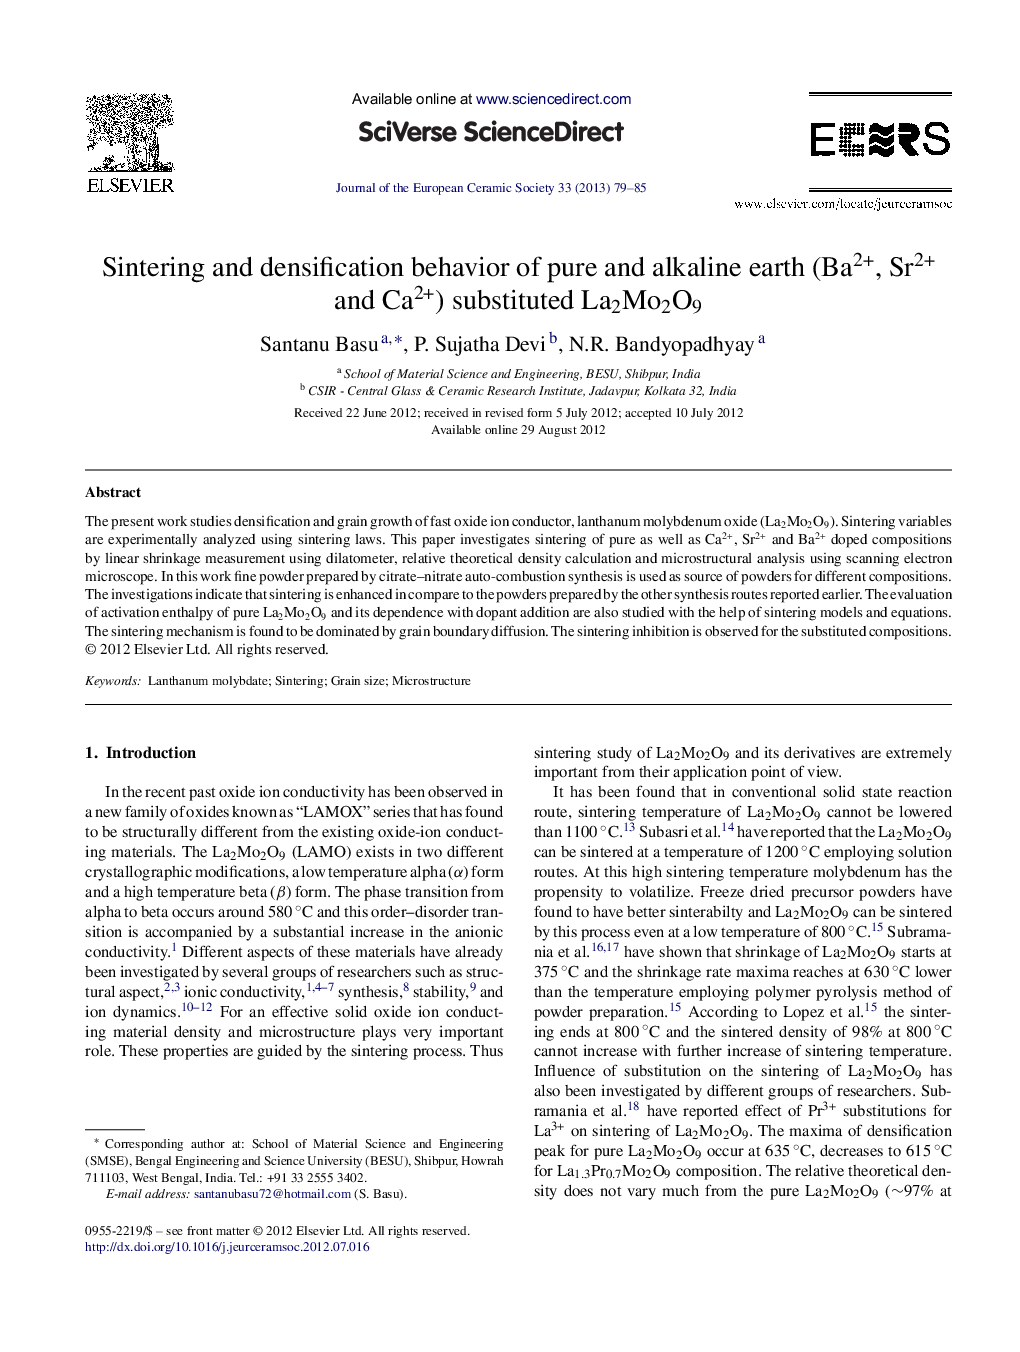 Sintering and densification behavior of pure and alkaline earth (Ba2+, Sr2+ and Ca2+) substituted La2Mo2O9